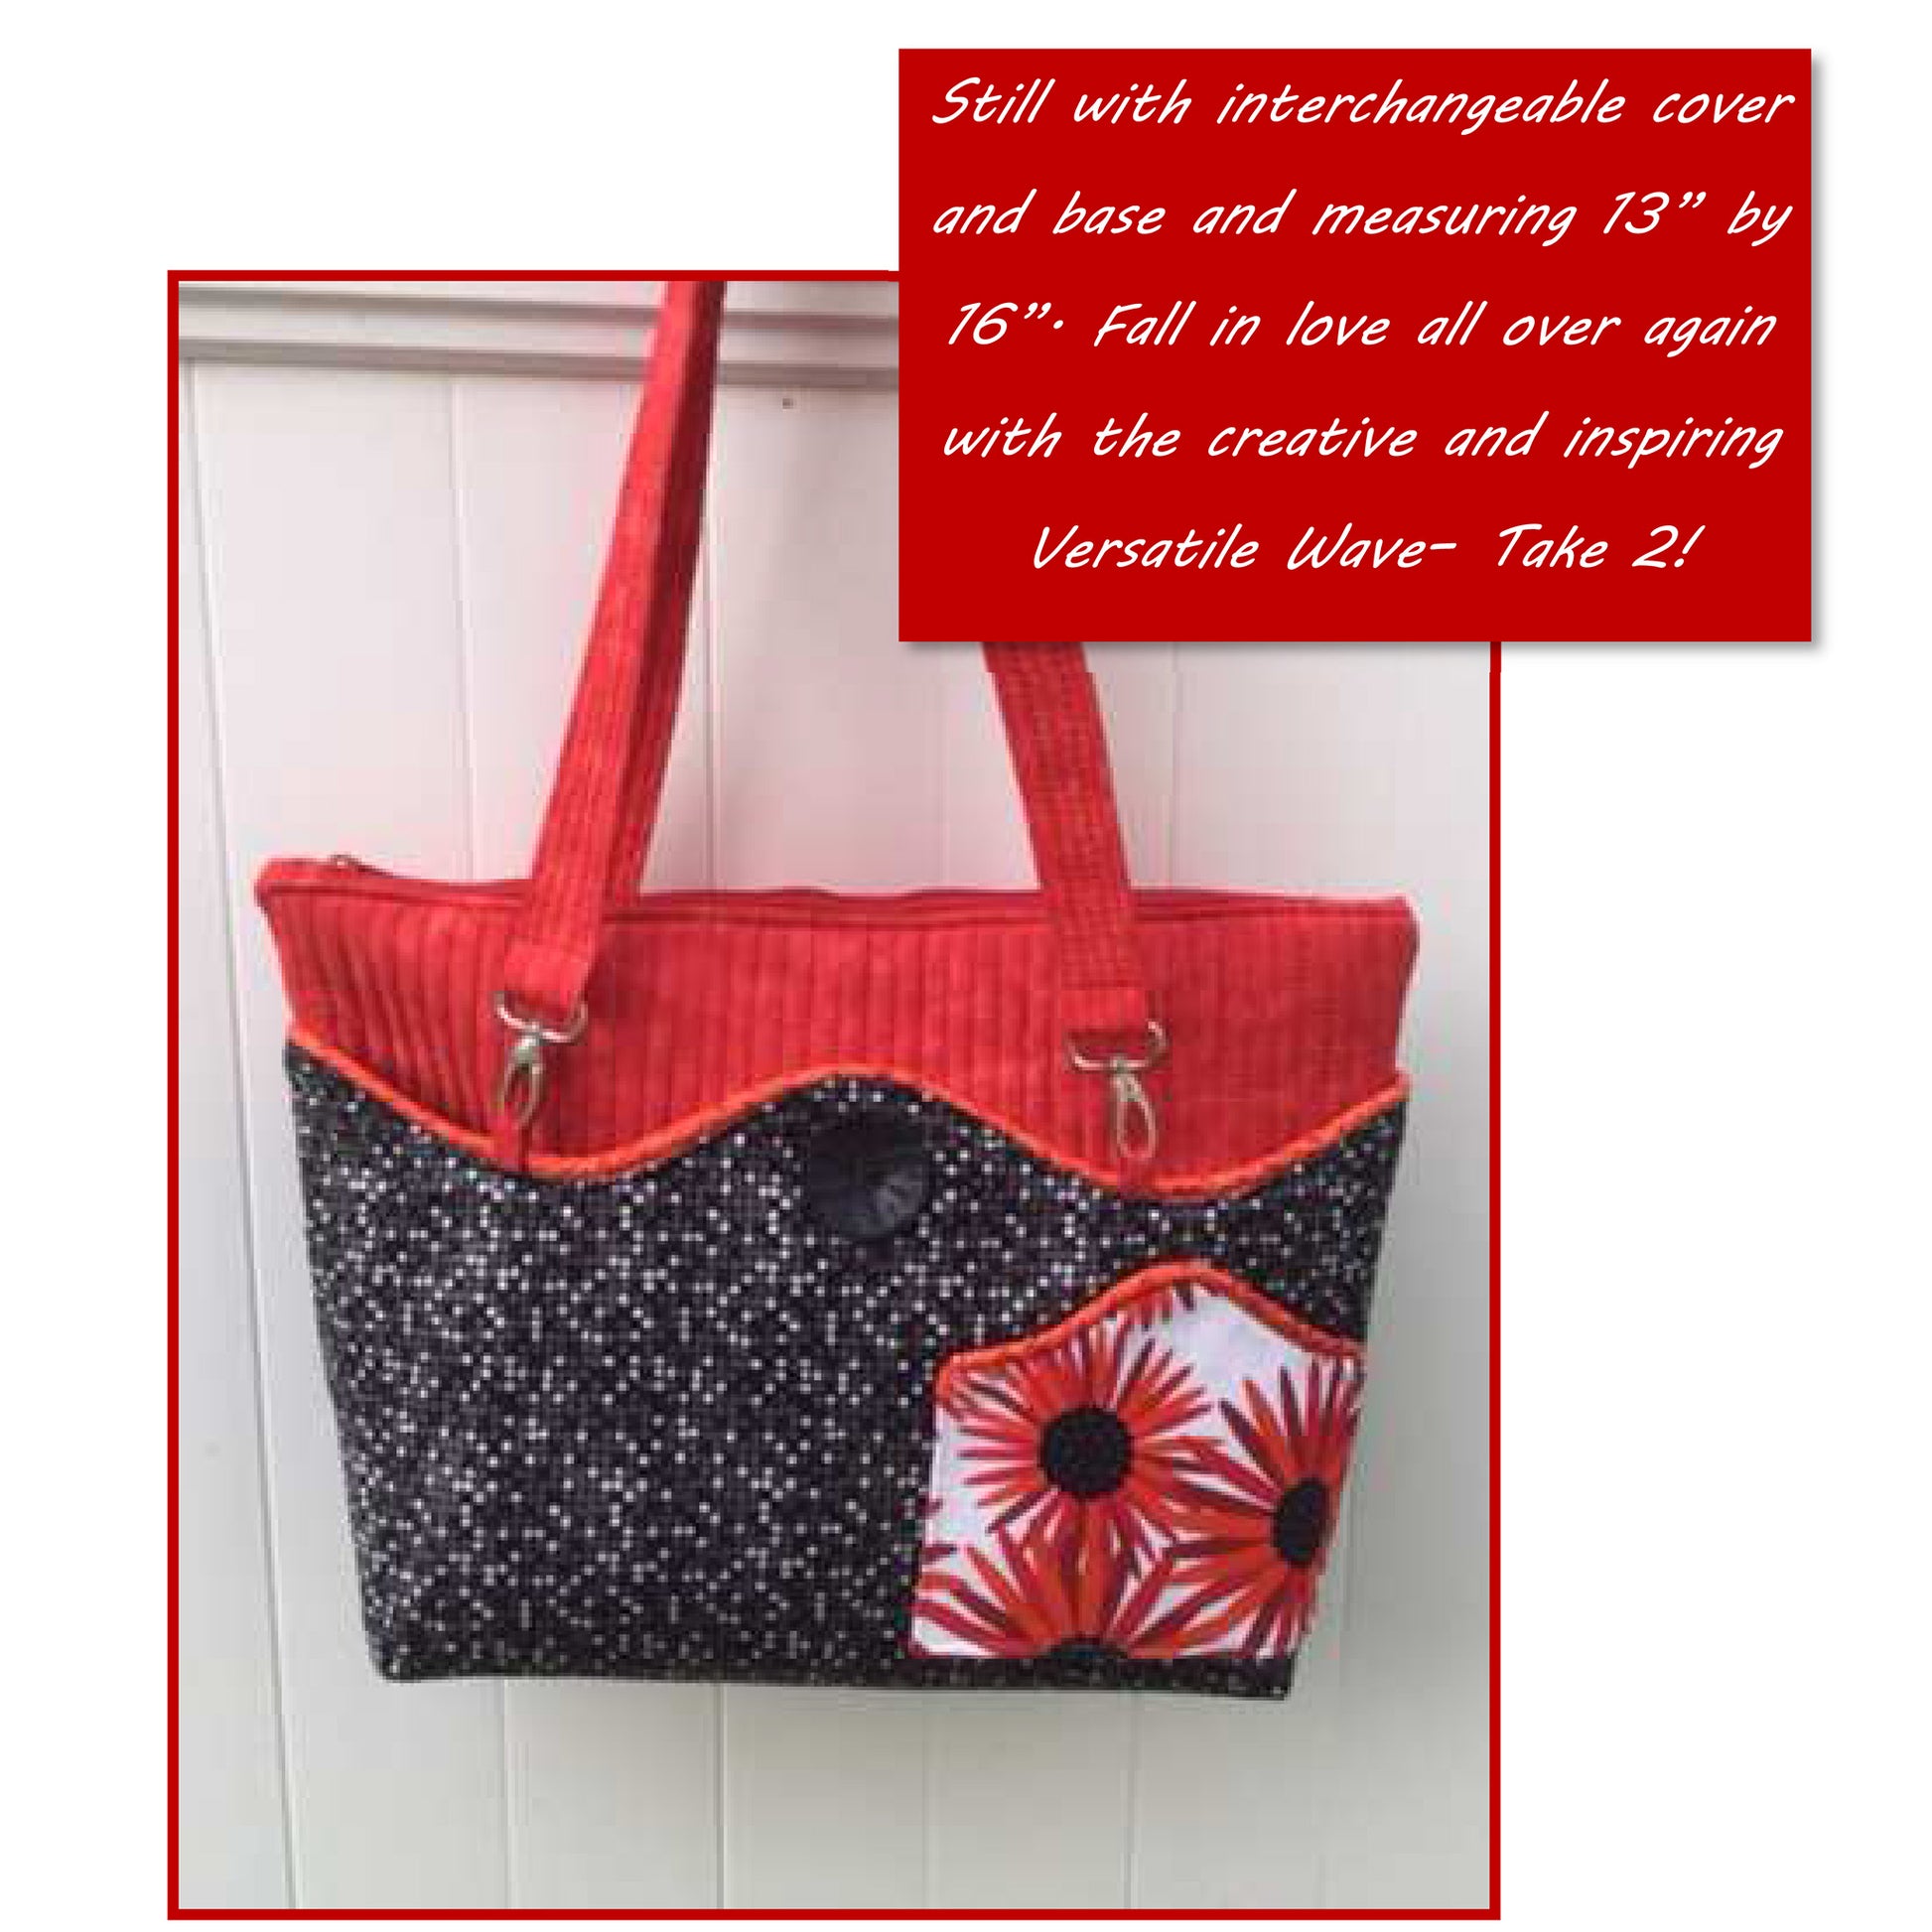  Red and black tote bag featuring a flower design for the Versatile Wave Take 2 purse pattern, allowing interchangeable covers to match your outfit 